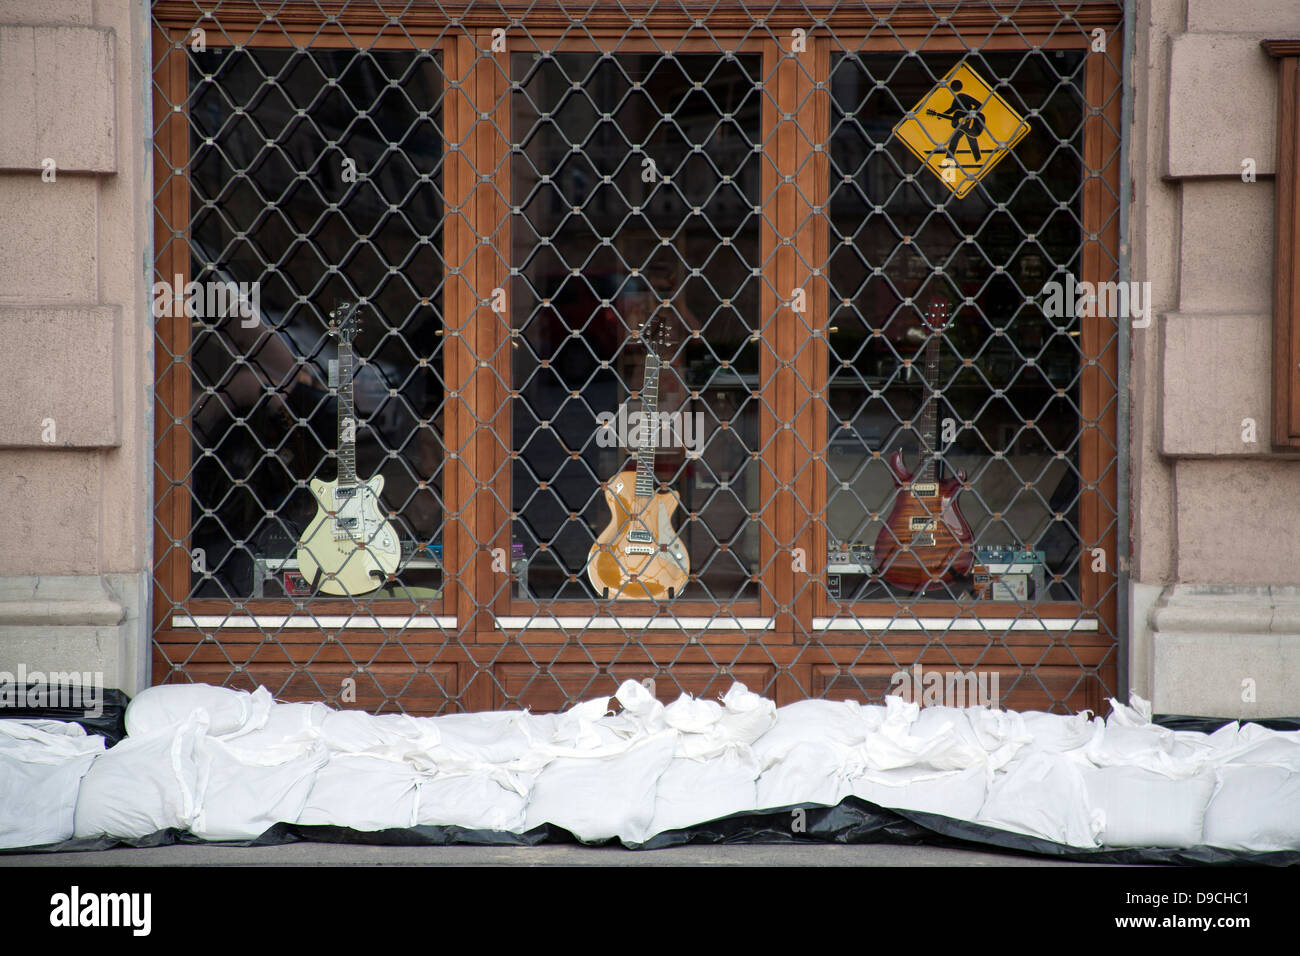 Sandbags lining the wall of a music shop with guitars in the window to protect from the flooding River Danube, Budapest, Hungary Stock Photo